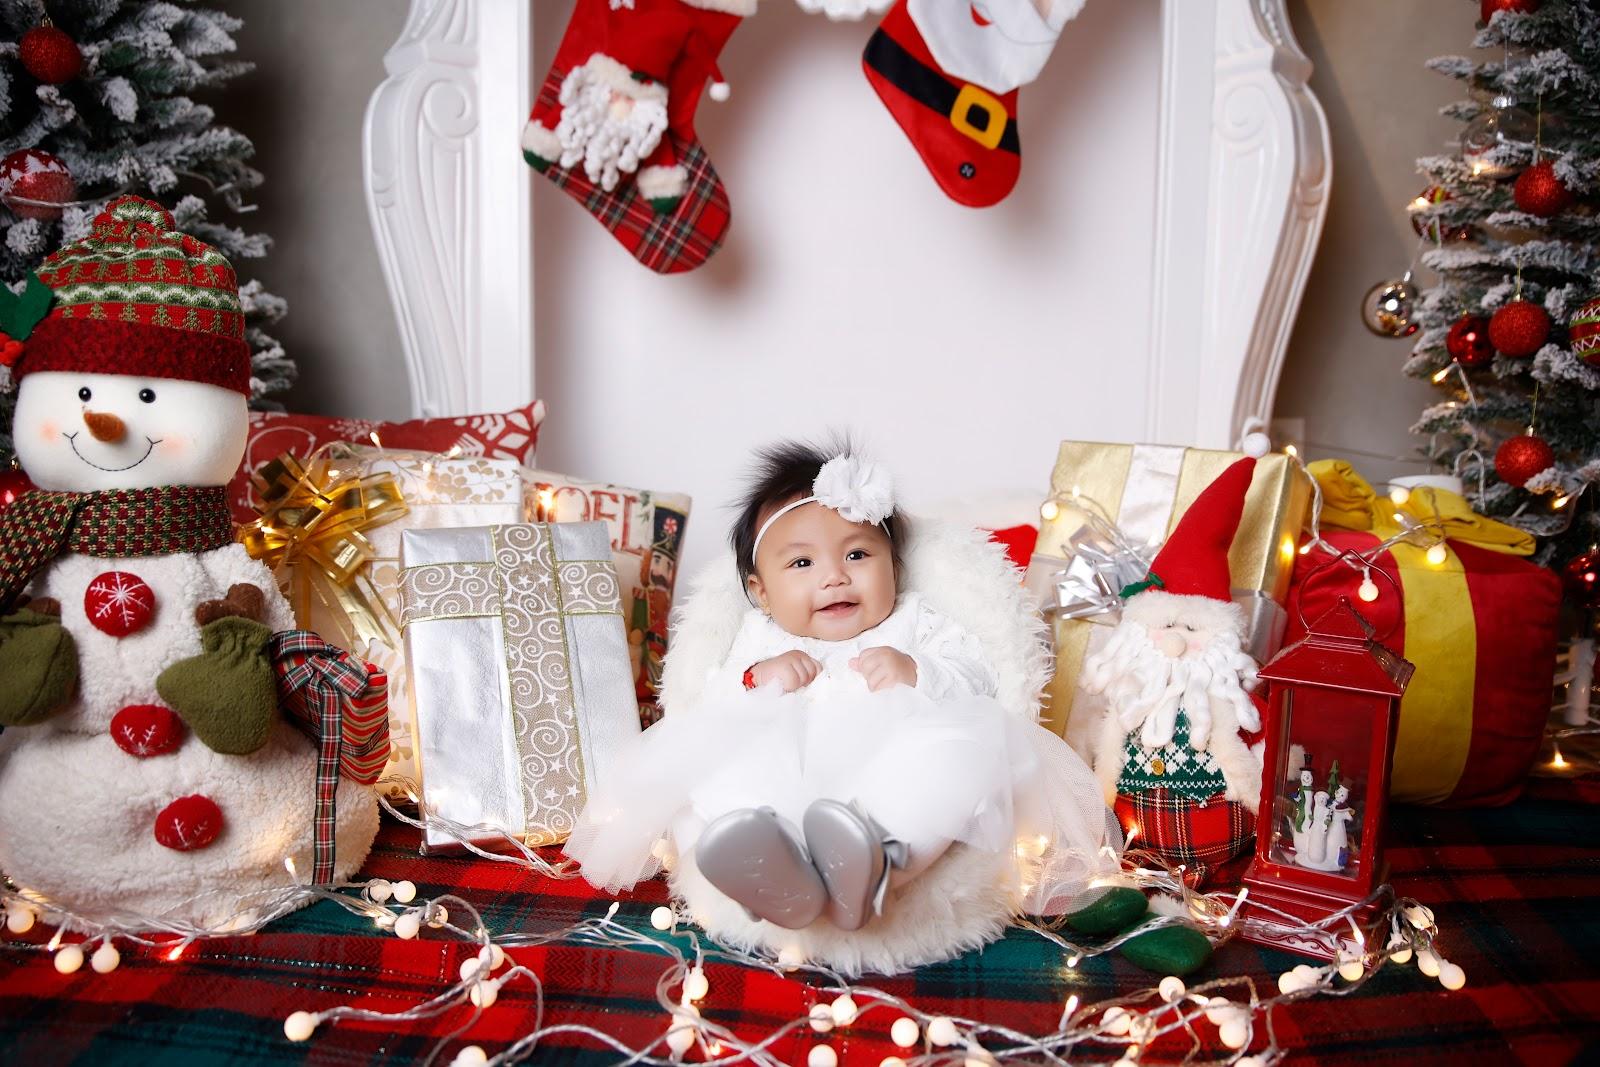 newborn christmas photo idea: baby dressed up in a white dress seated on a sofa bed designed like a manger surrounded by fairy lgihts